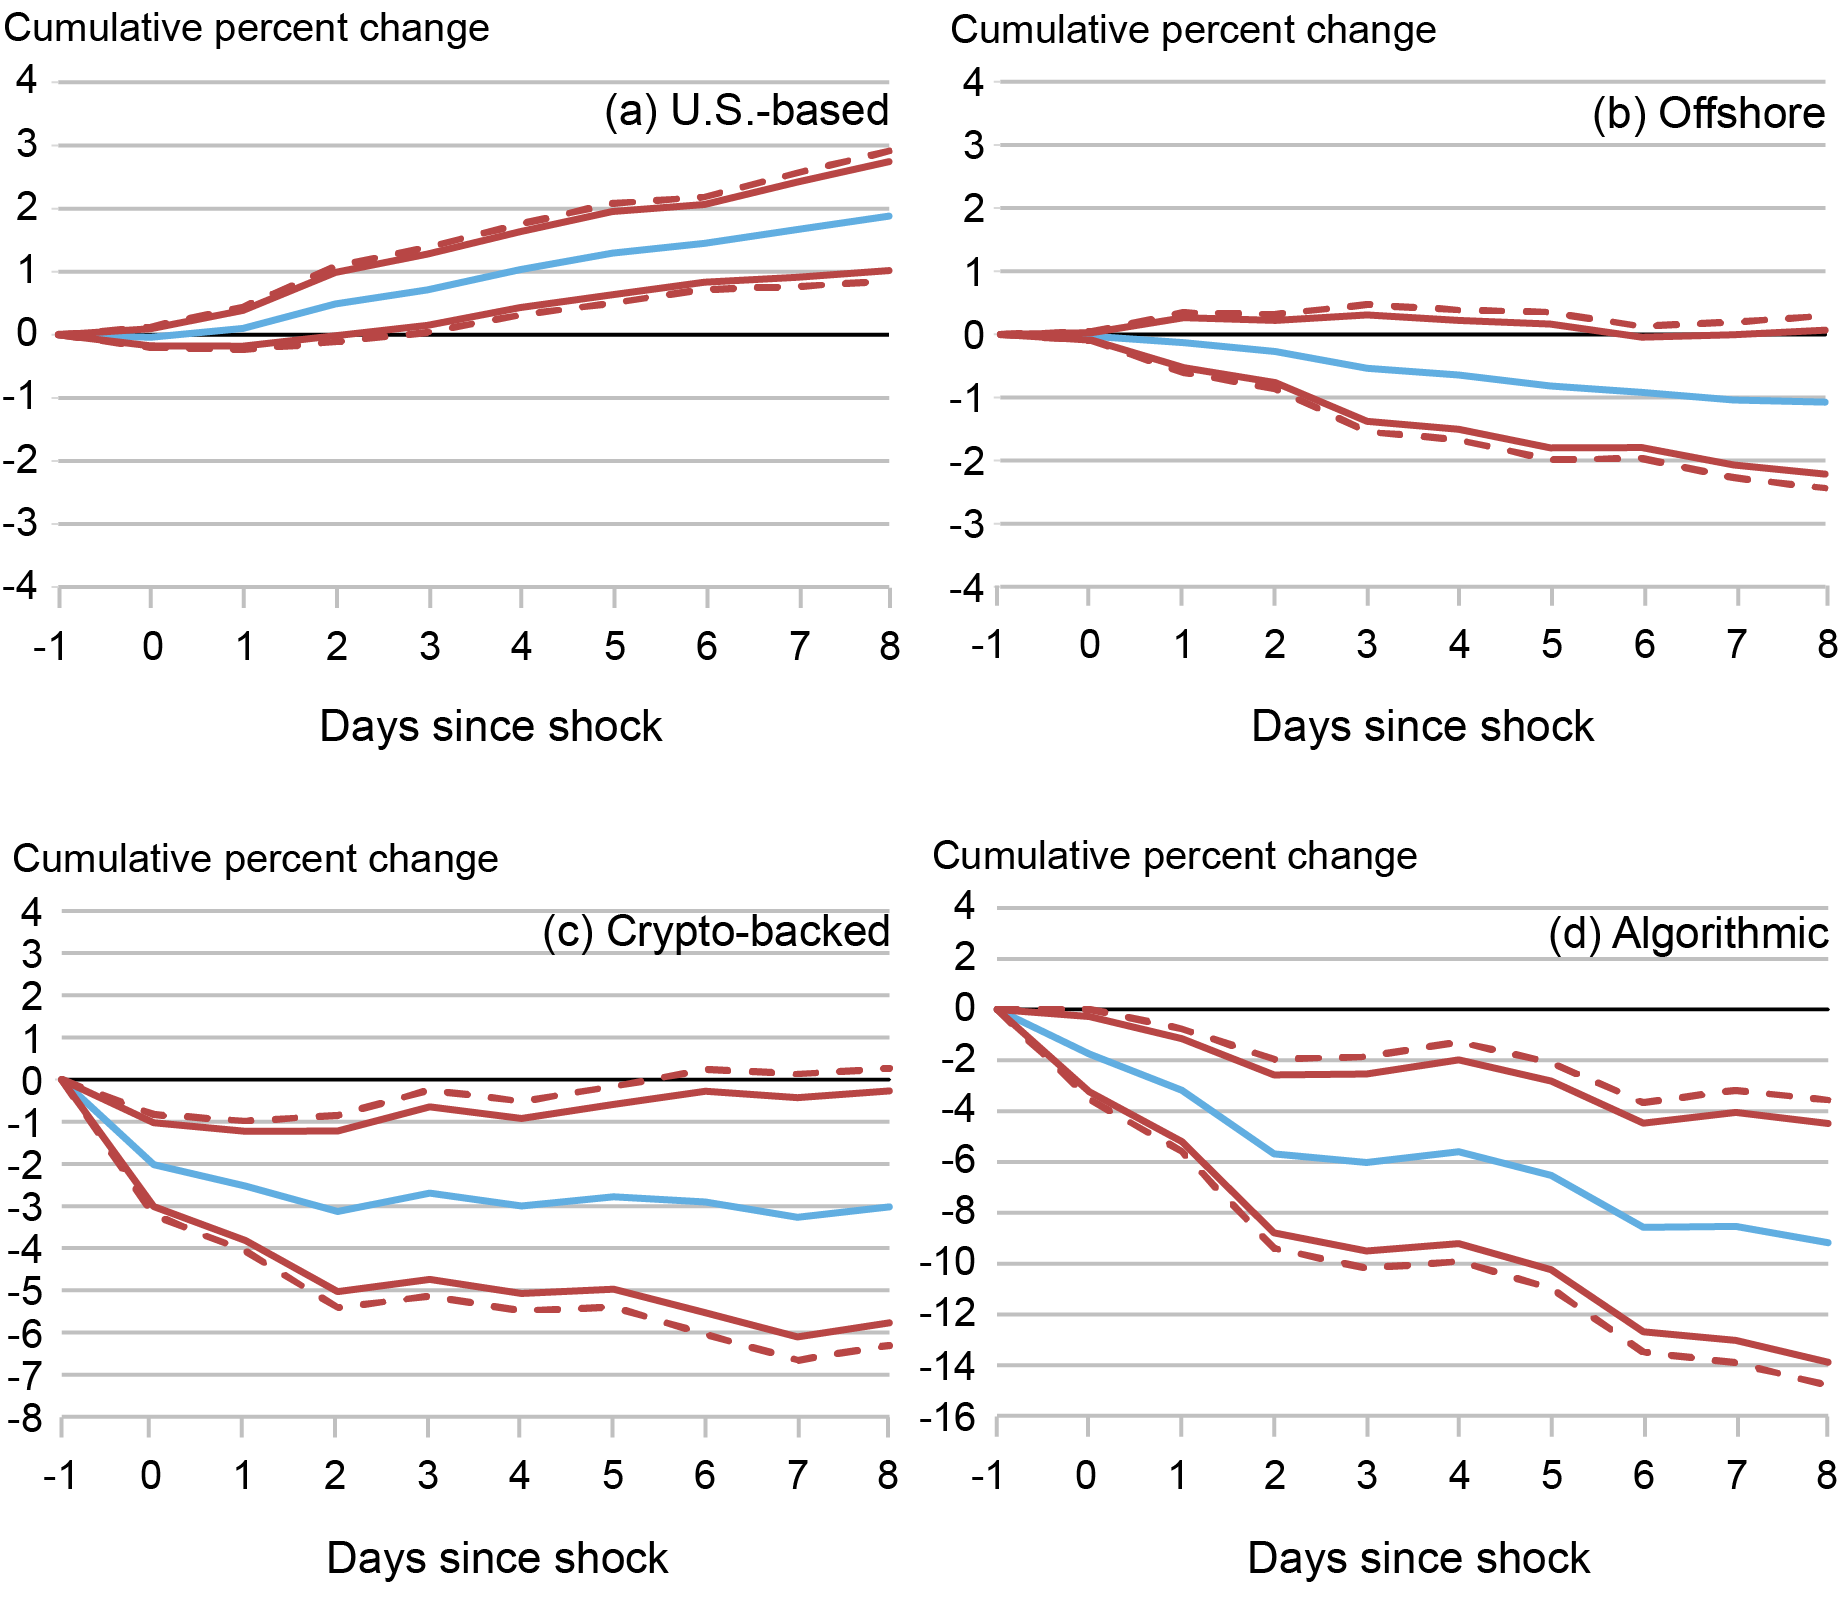 Four line charts for U.S.-based, offshore, crypto-backed, and algorithmic stablecoins tracking capital flow for eight days after a negative bitcoin price shock; results show capital flows out of riskier (offshore, crypto-backed, and algorithmic) stablecoins into safer (U.S.-based asset-backed) ones.